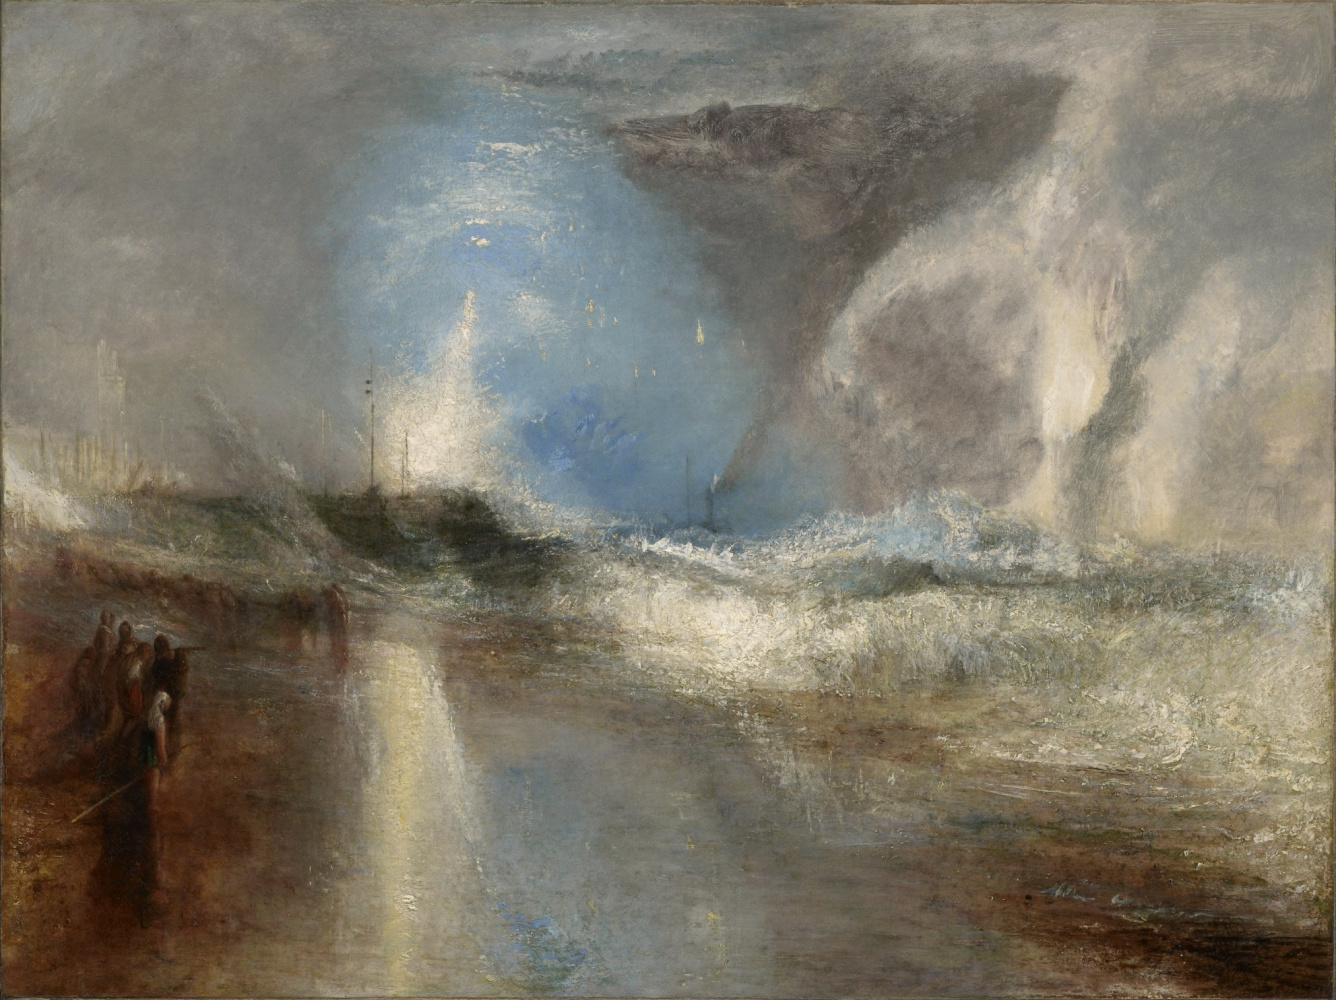 Touches to the portrait: light and darkness of William Turner